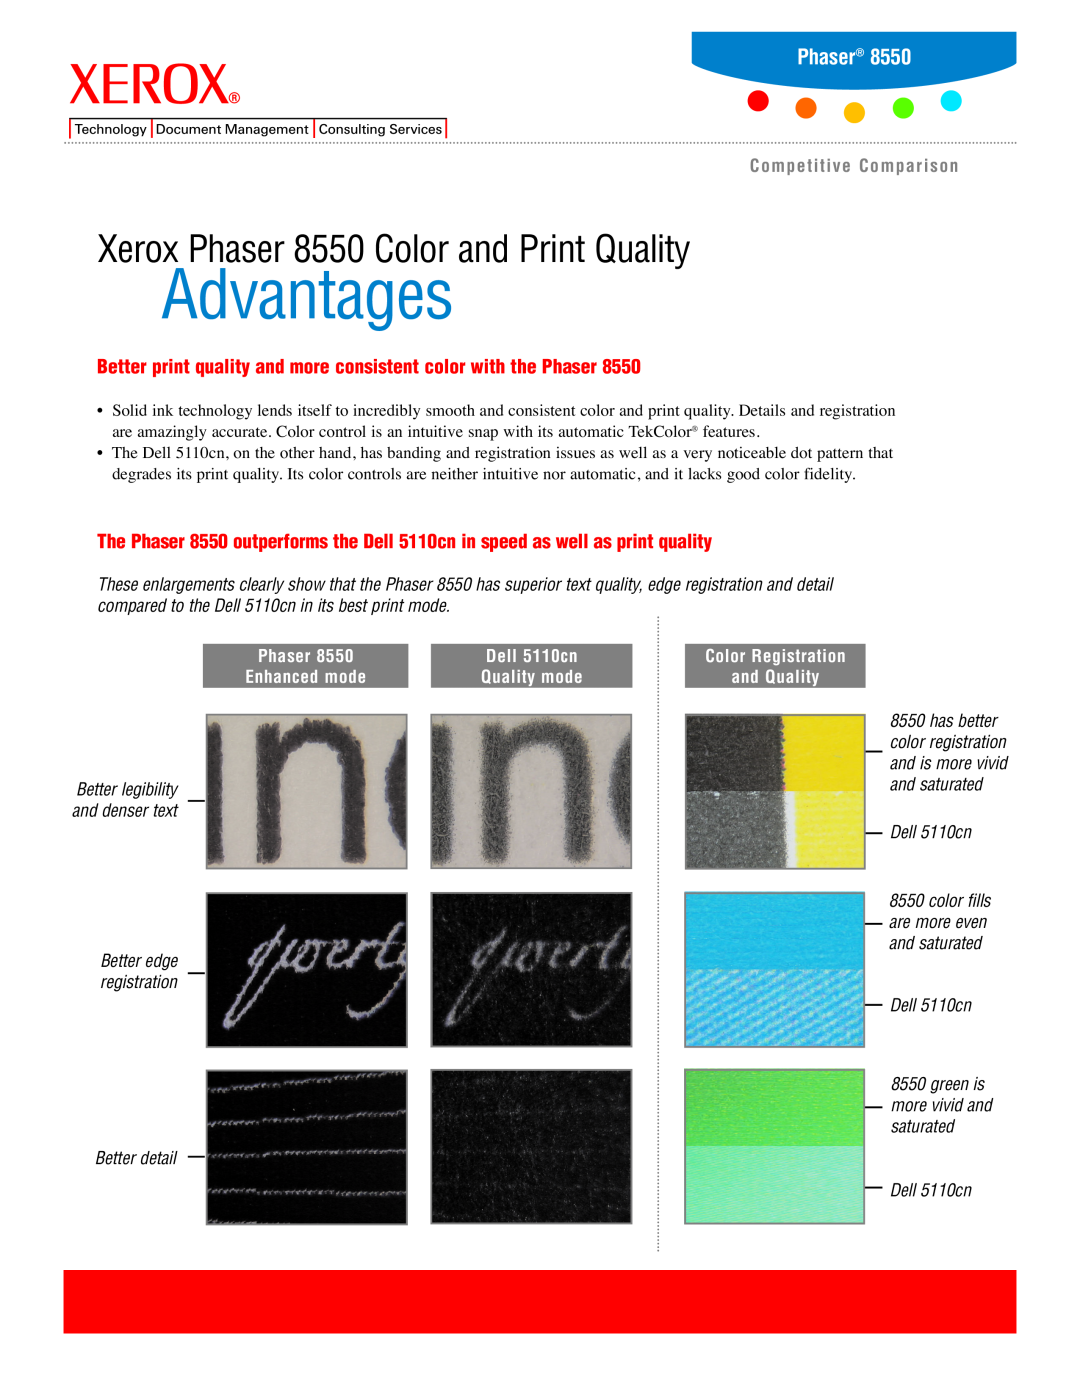 Xerox manual Advantages, Xerox Phaser 8550 Color and Print Quality 